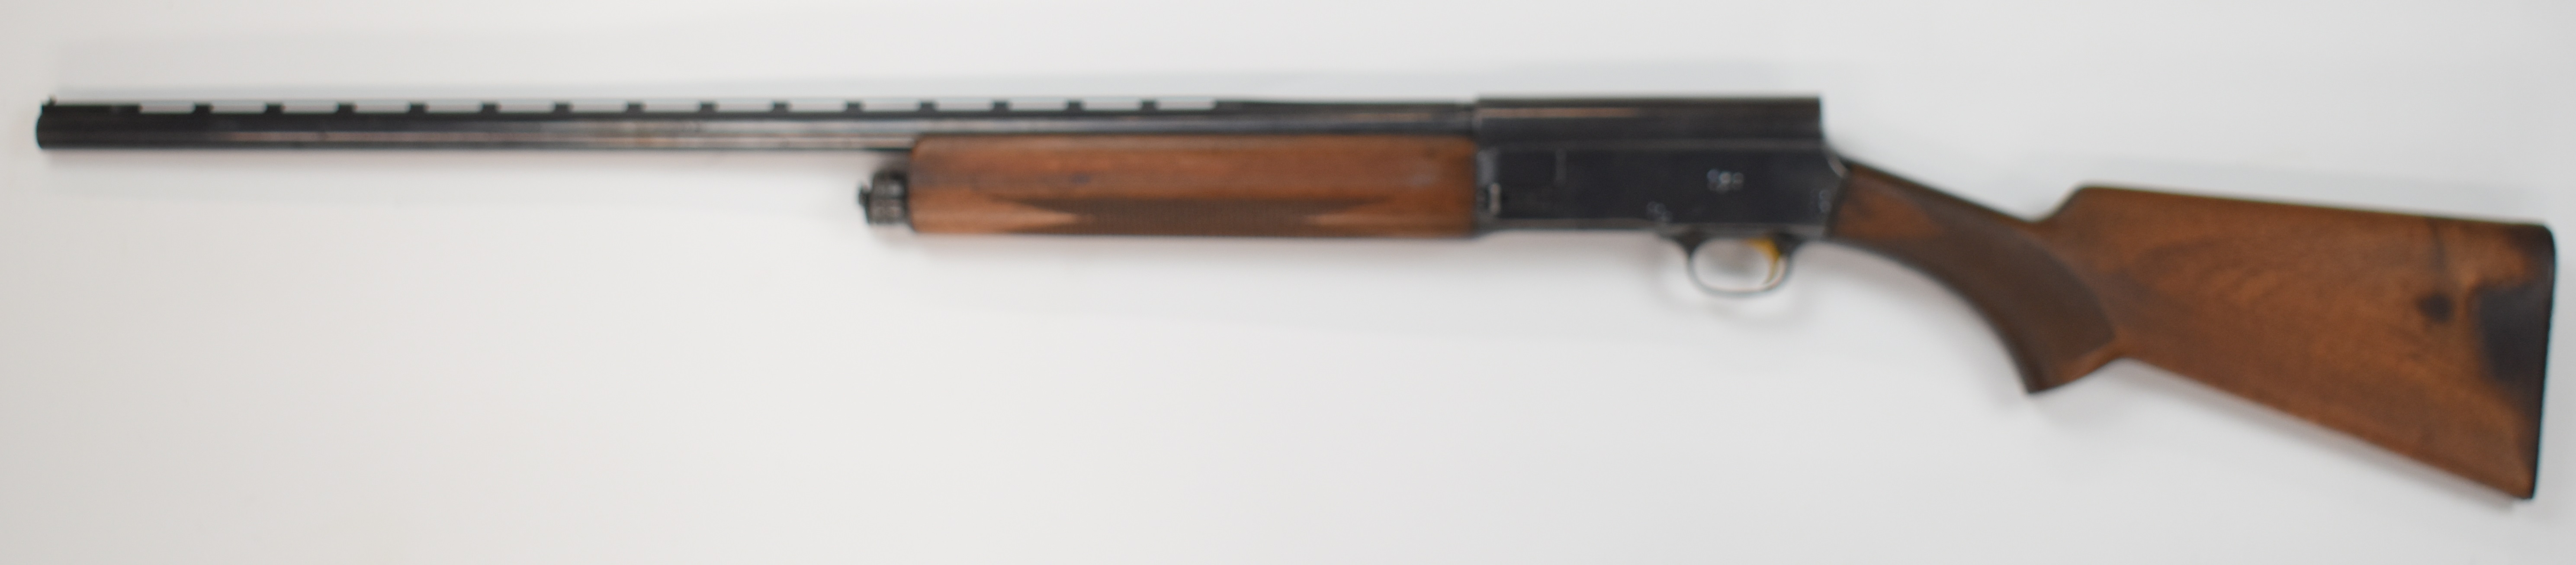 Browning 16 bore 3-shot semi-automatic shotgun with chequered semi-pistol grip and forend and 27 - Image 10 of 18